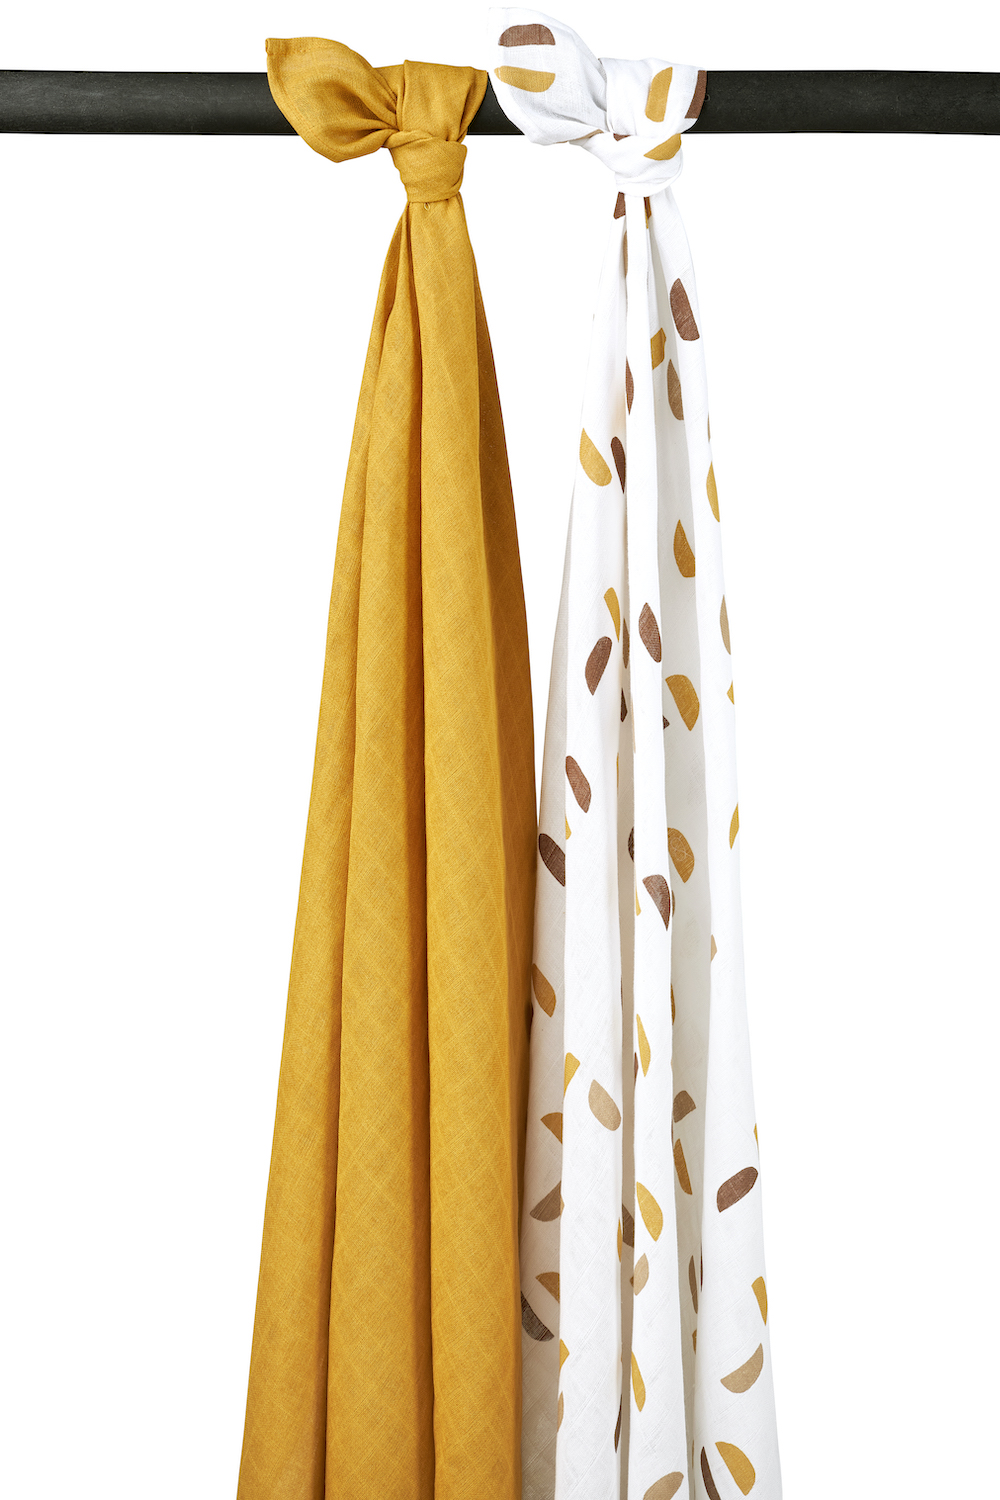 Musselin Swaddles 2-pack Shapes - Honey Gold - 120x120cm